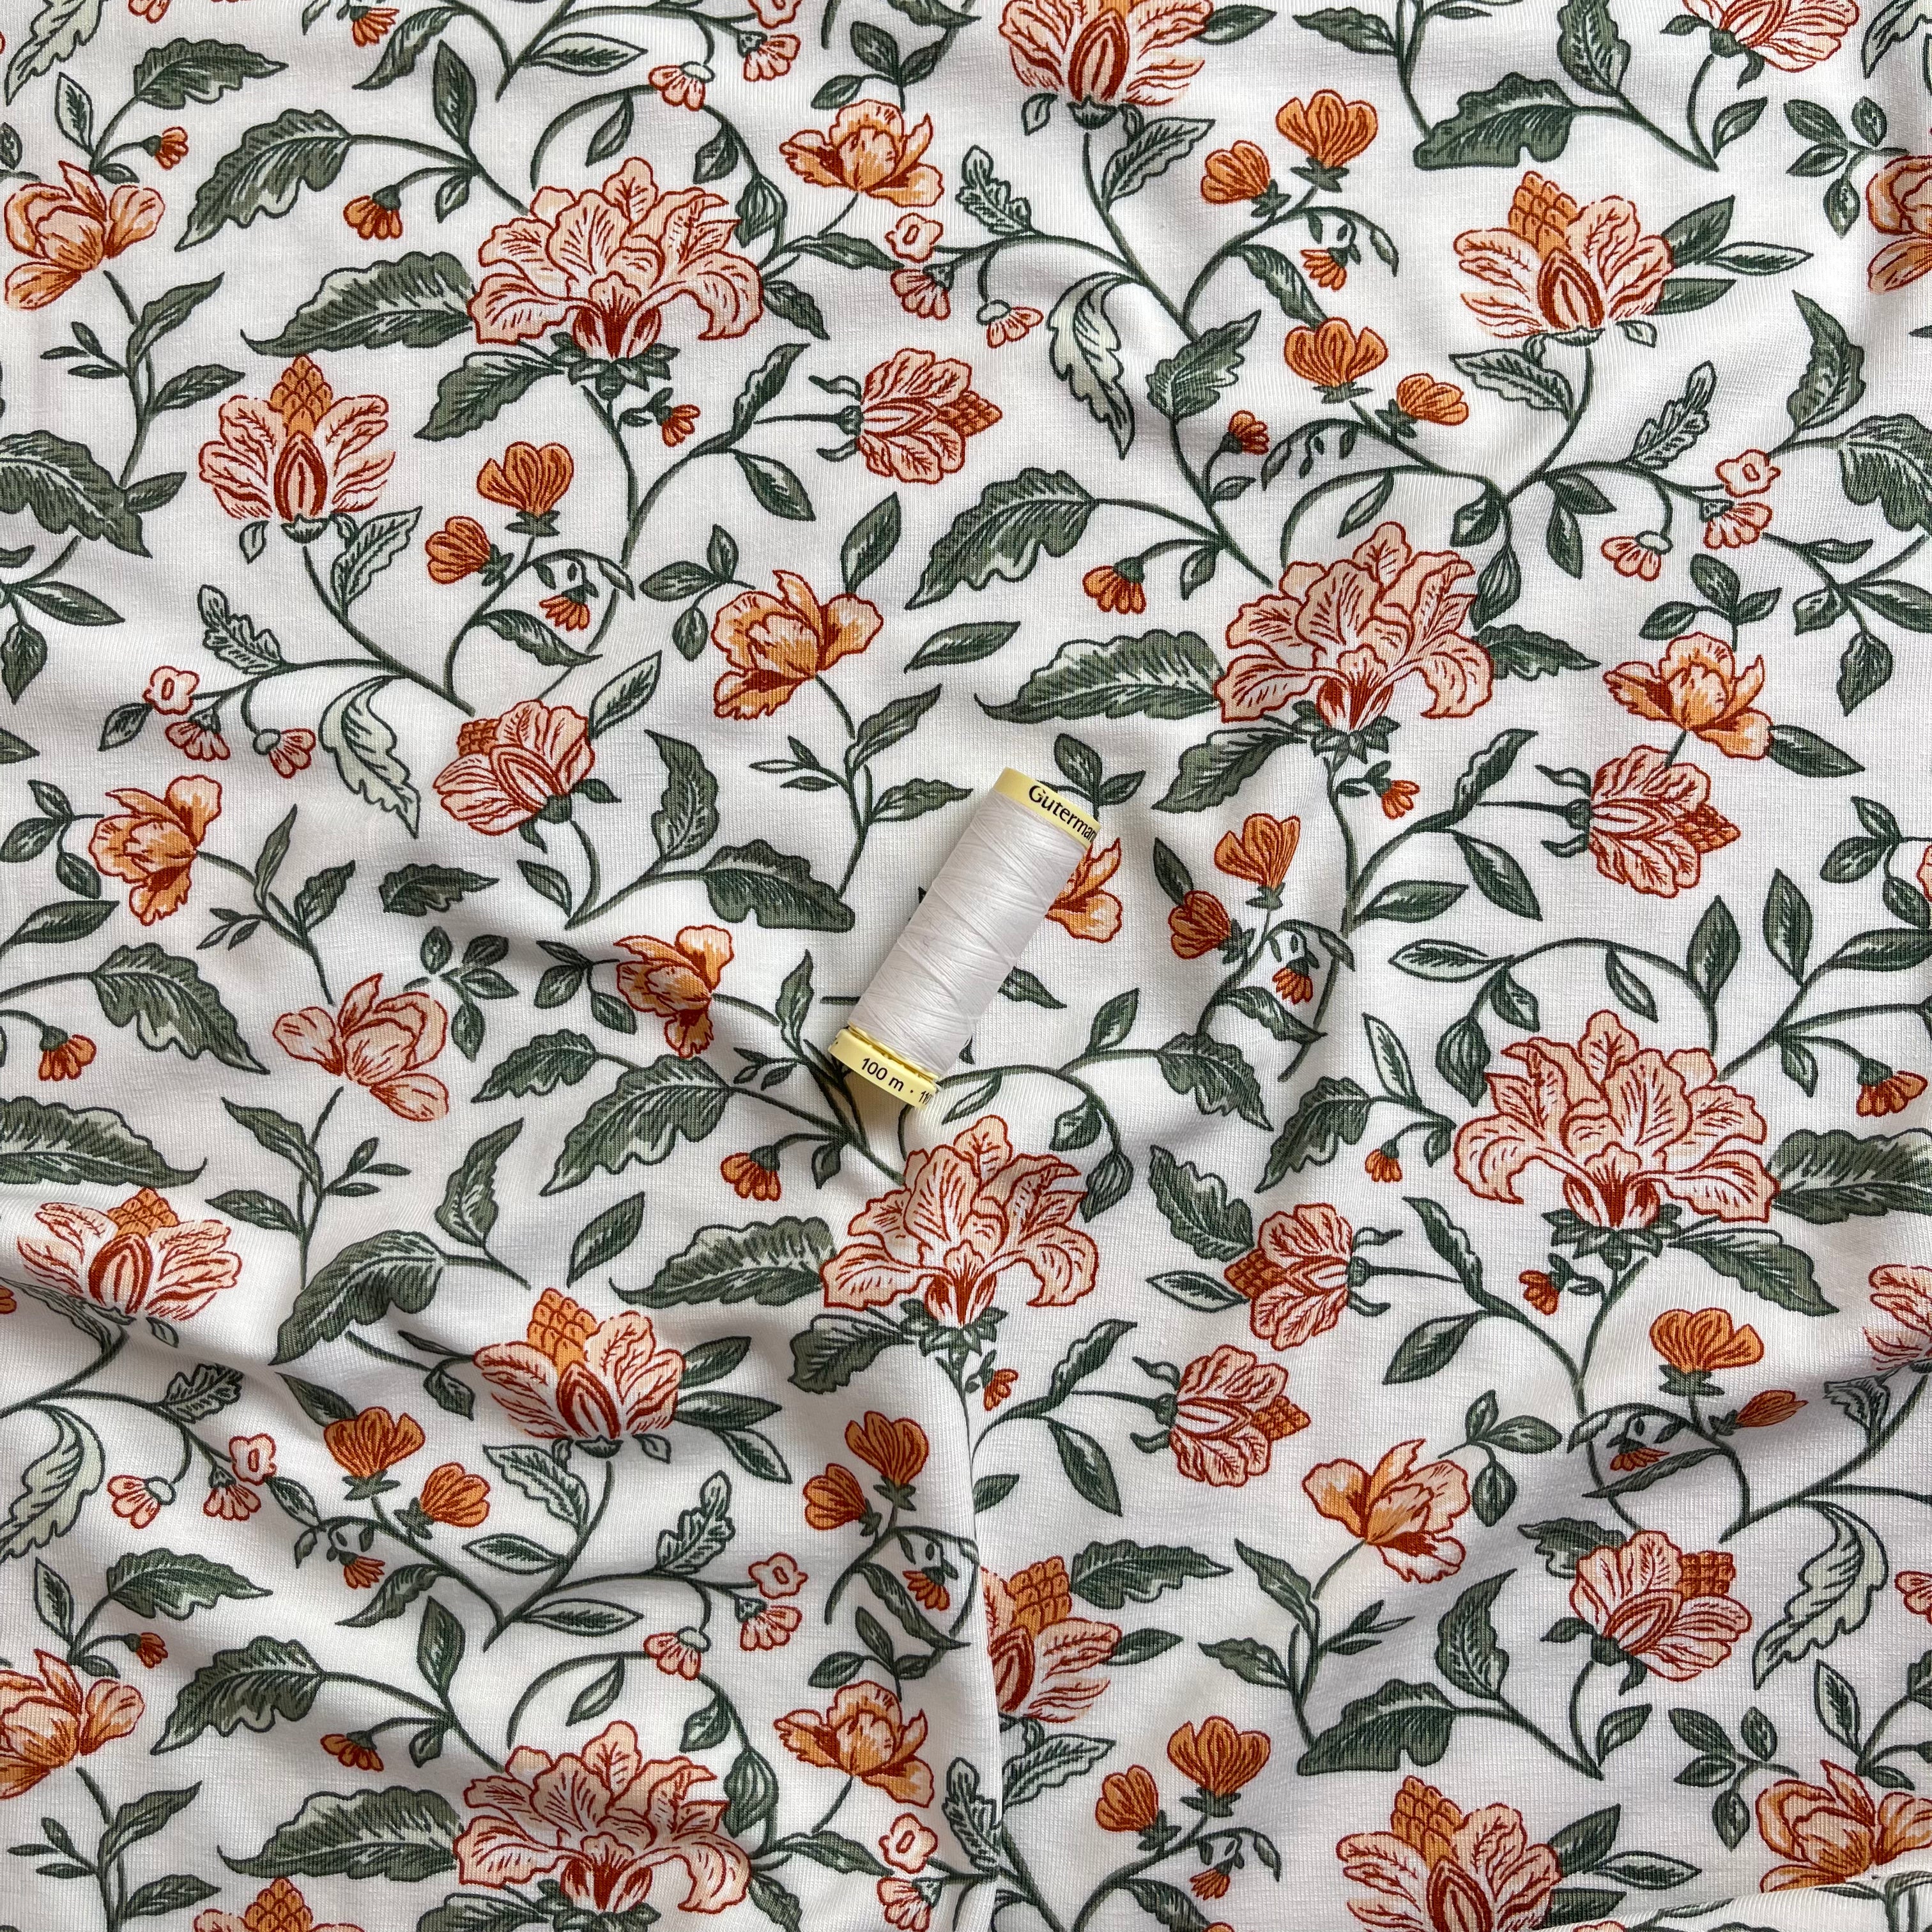 REMNANT 1.93 metres - Magnolia in White Bamboo Cotton Jersey